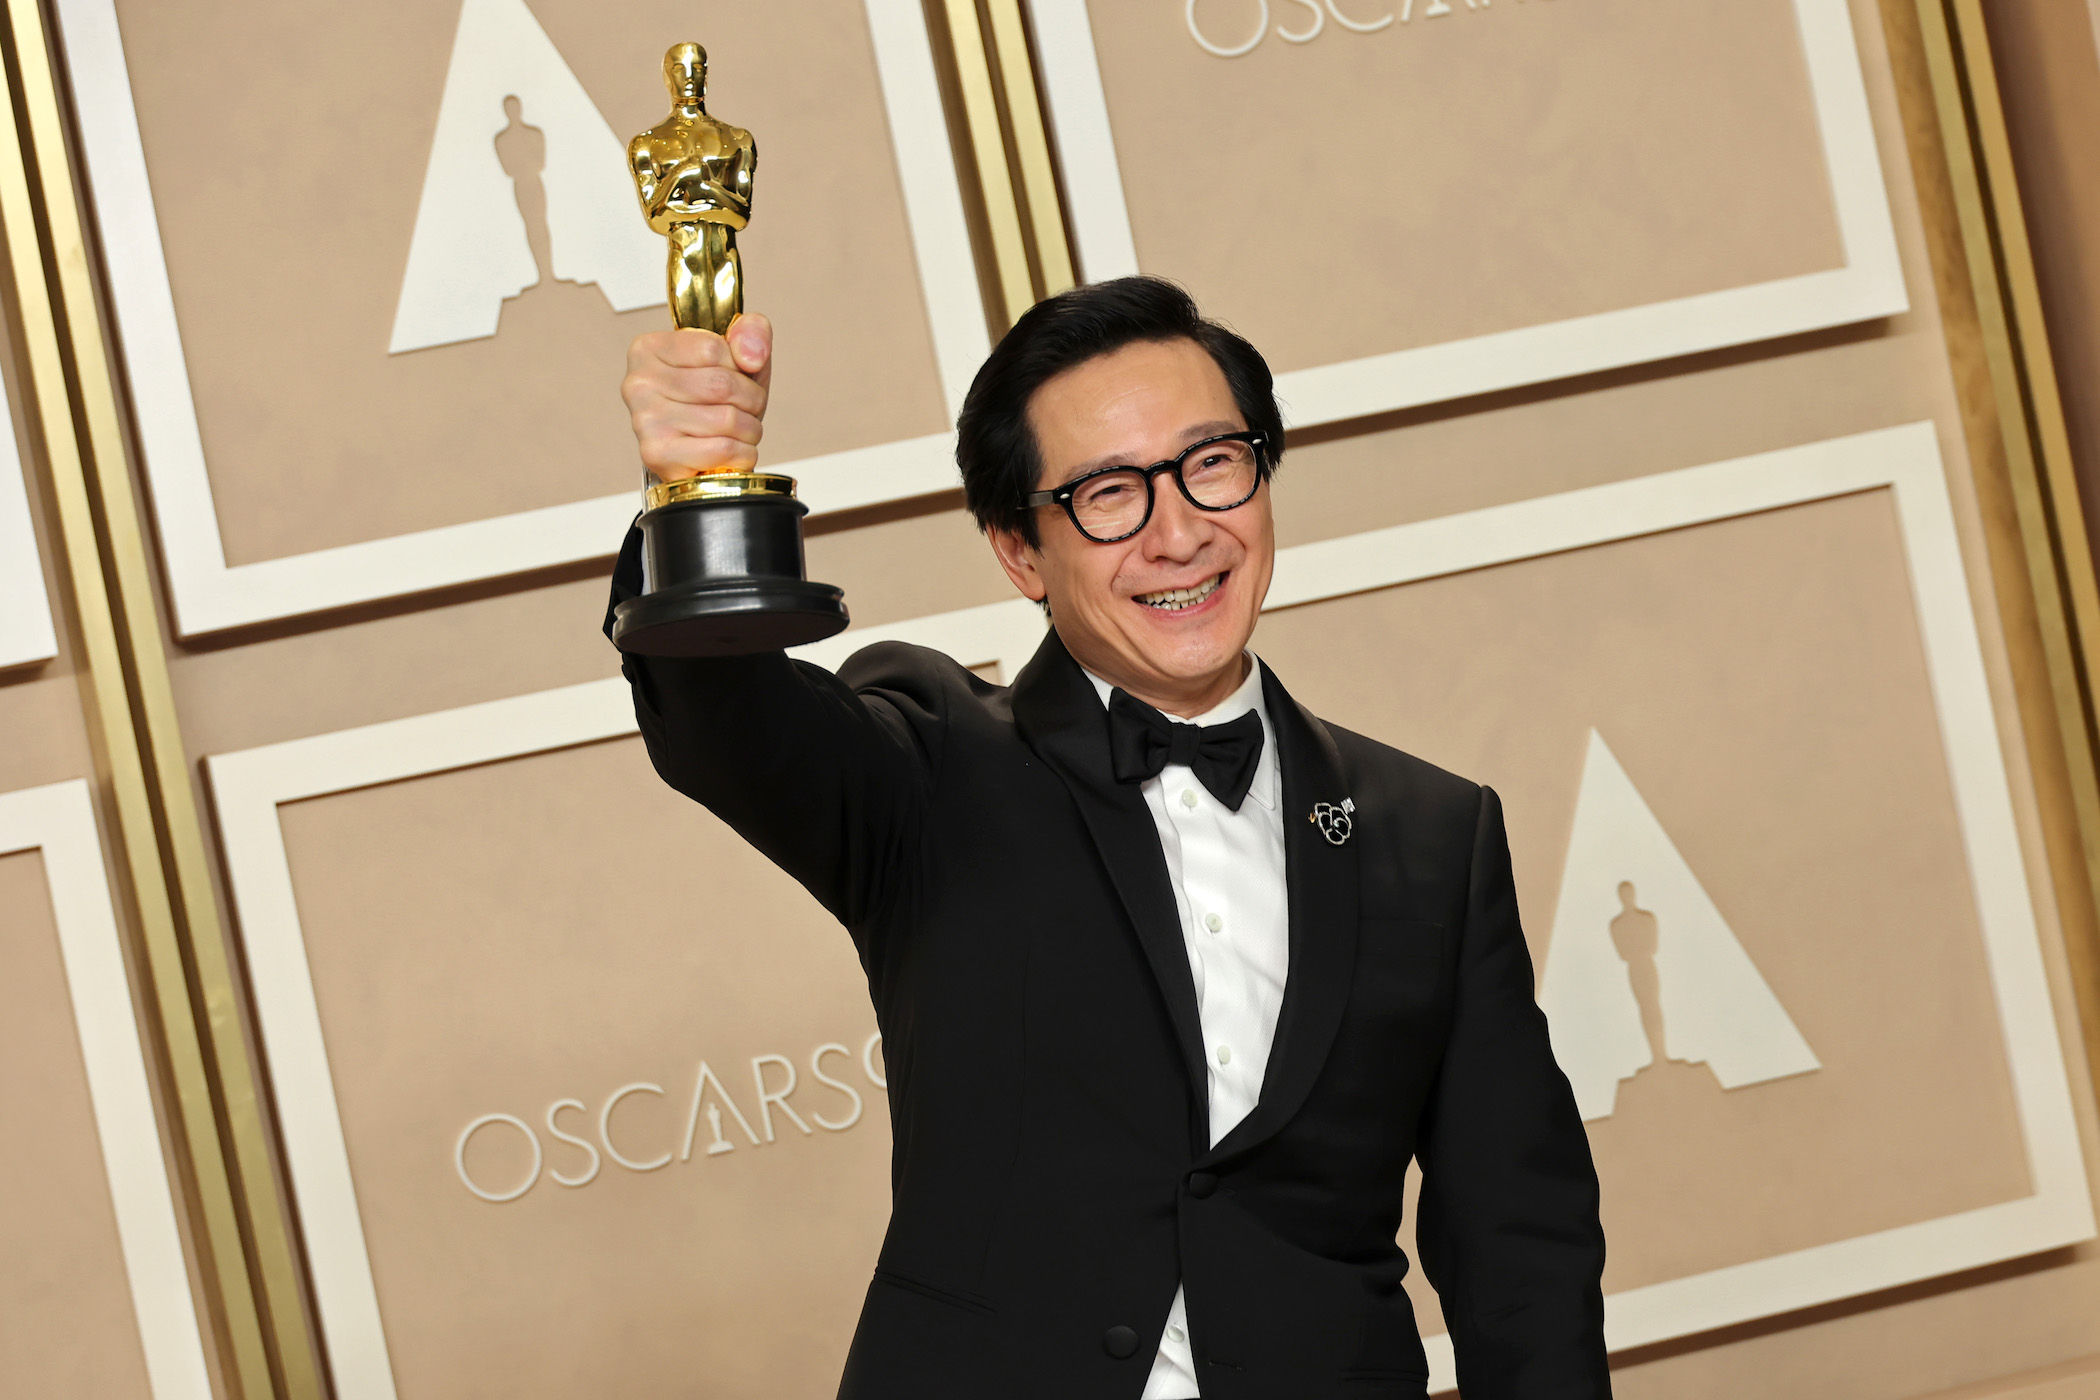 Oscars 2023 Ke Huy Quan scripts history with Best Supporting Actor win